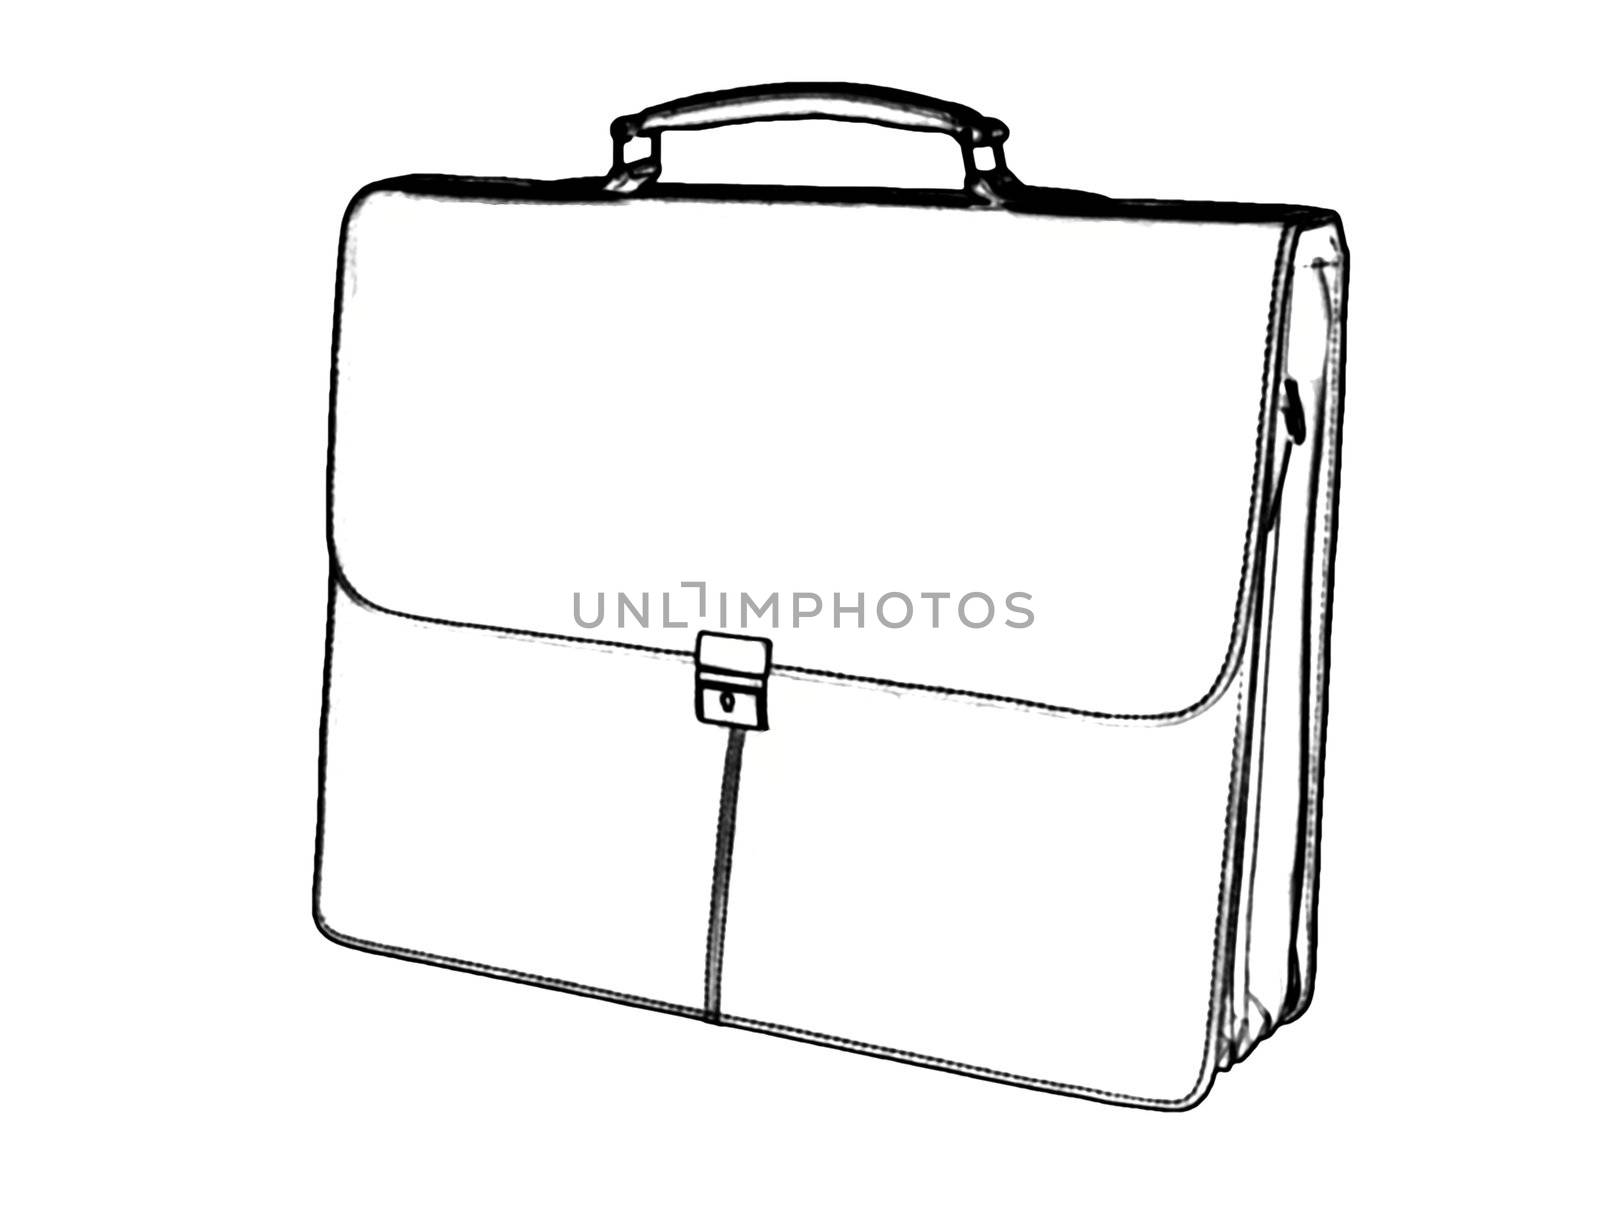 Portfolio with the handle on a white background